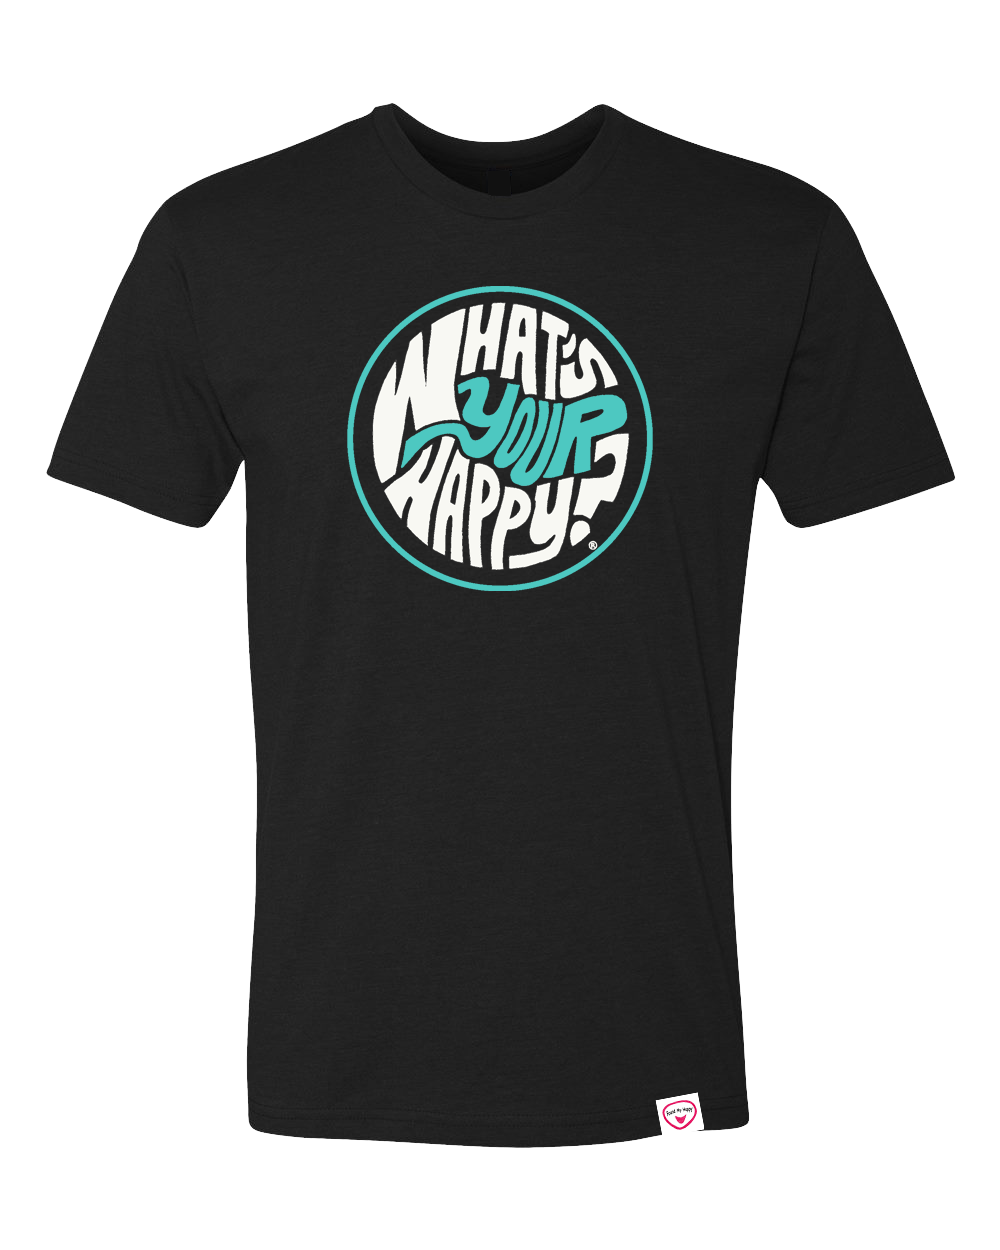 Copy of What's Your Happy? White/Mint Circle Tee - Found My Happy